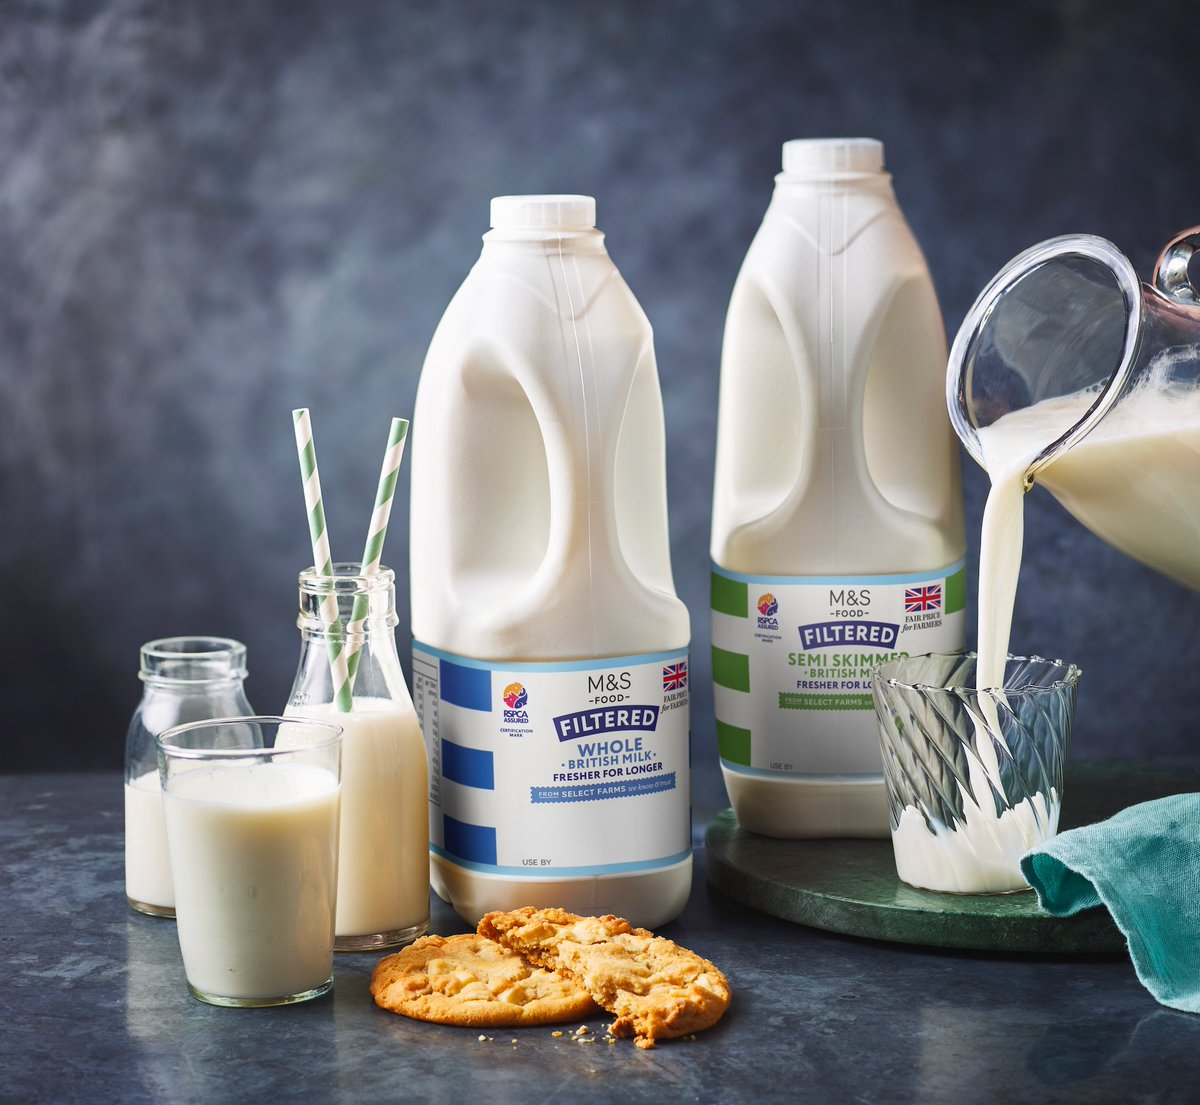 We’re committed to helping our customers reduce household food waste, so from today, our brand new 100% @rspcaassured M&S filtered milk is available in stores, with an extended shelf life of up to 15 days compared to standard fresh milk🥛 #PlanA #NotJustAnyNews #Sustainability